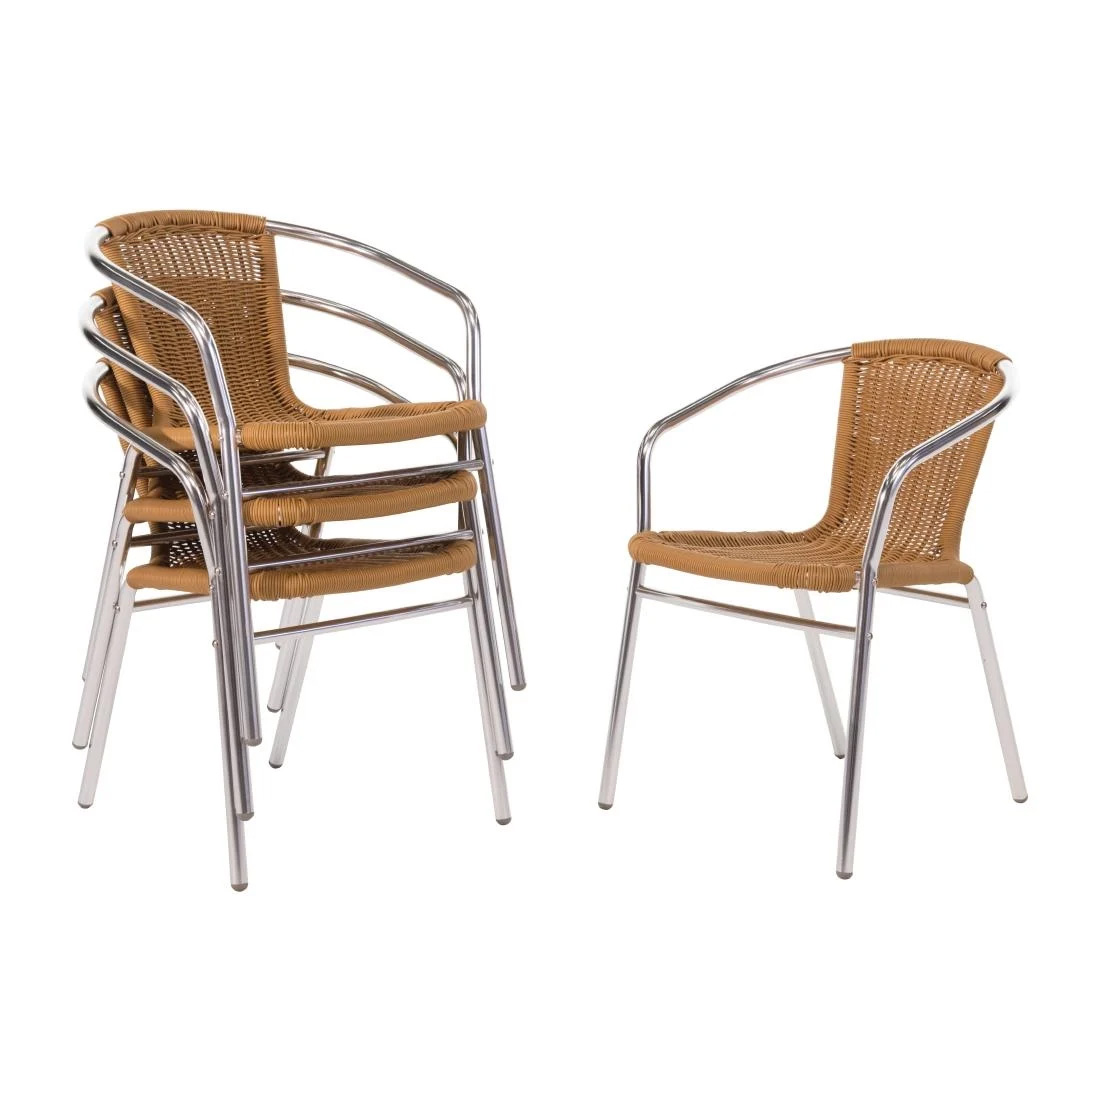 Aluminium and Natural Wicker Chair - Pack of 4